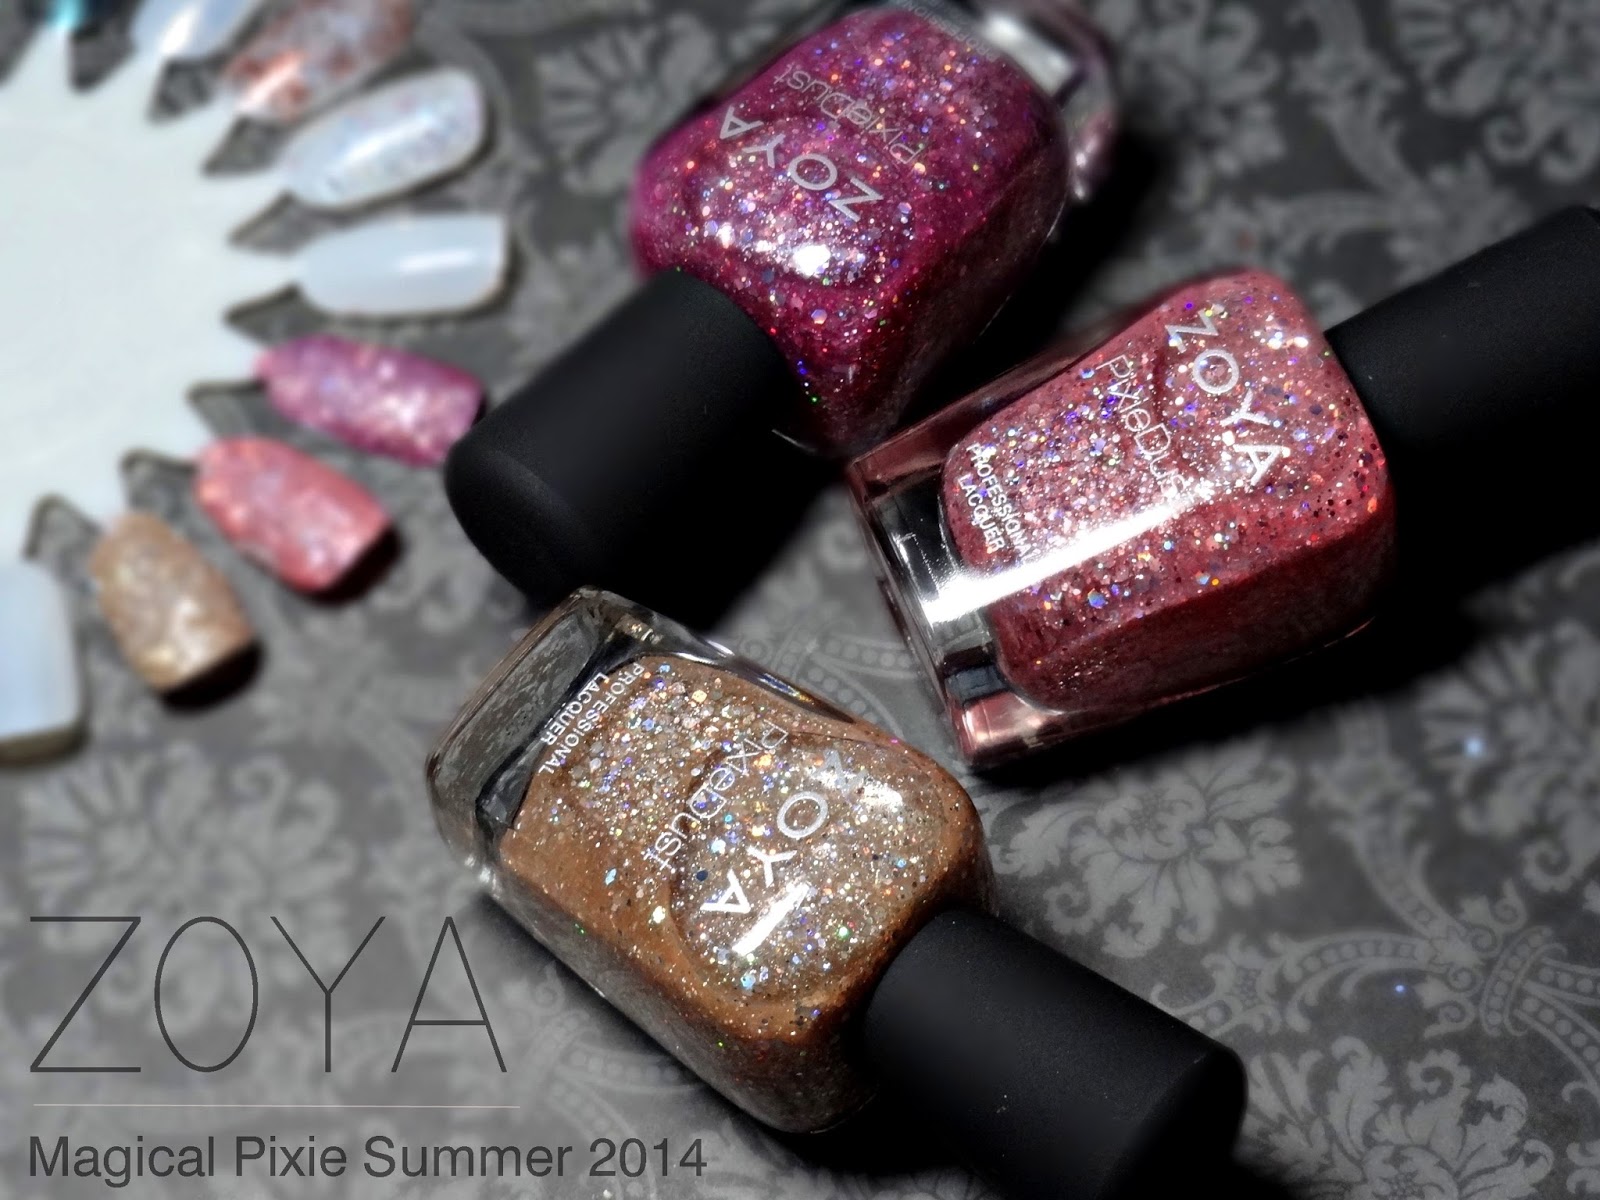 ZOYA Magical Pixie Summer 2014 Collection